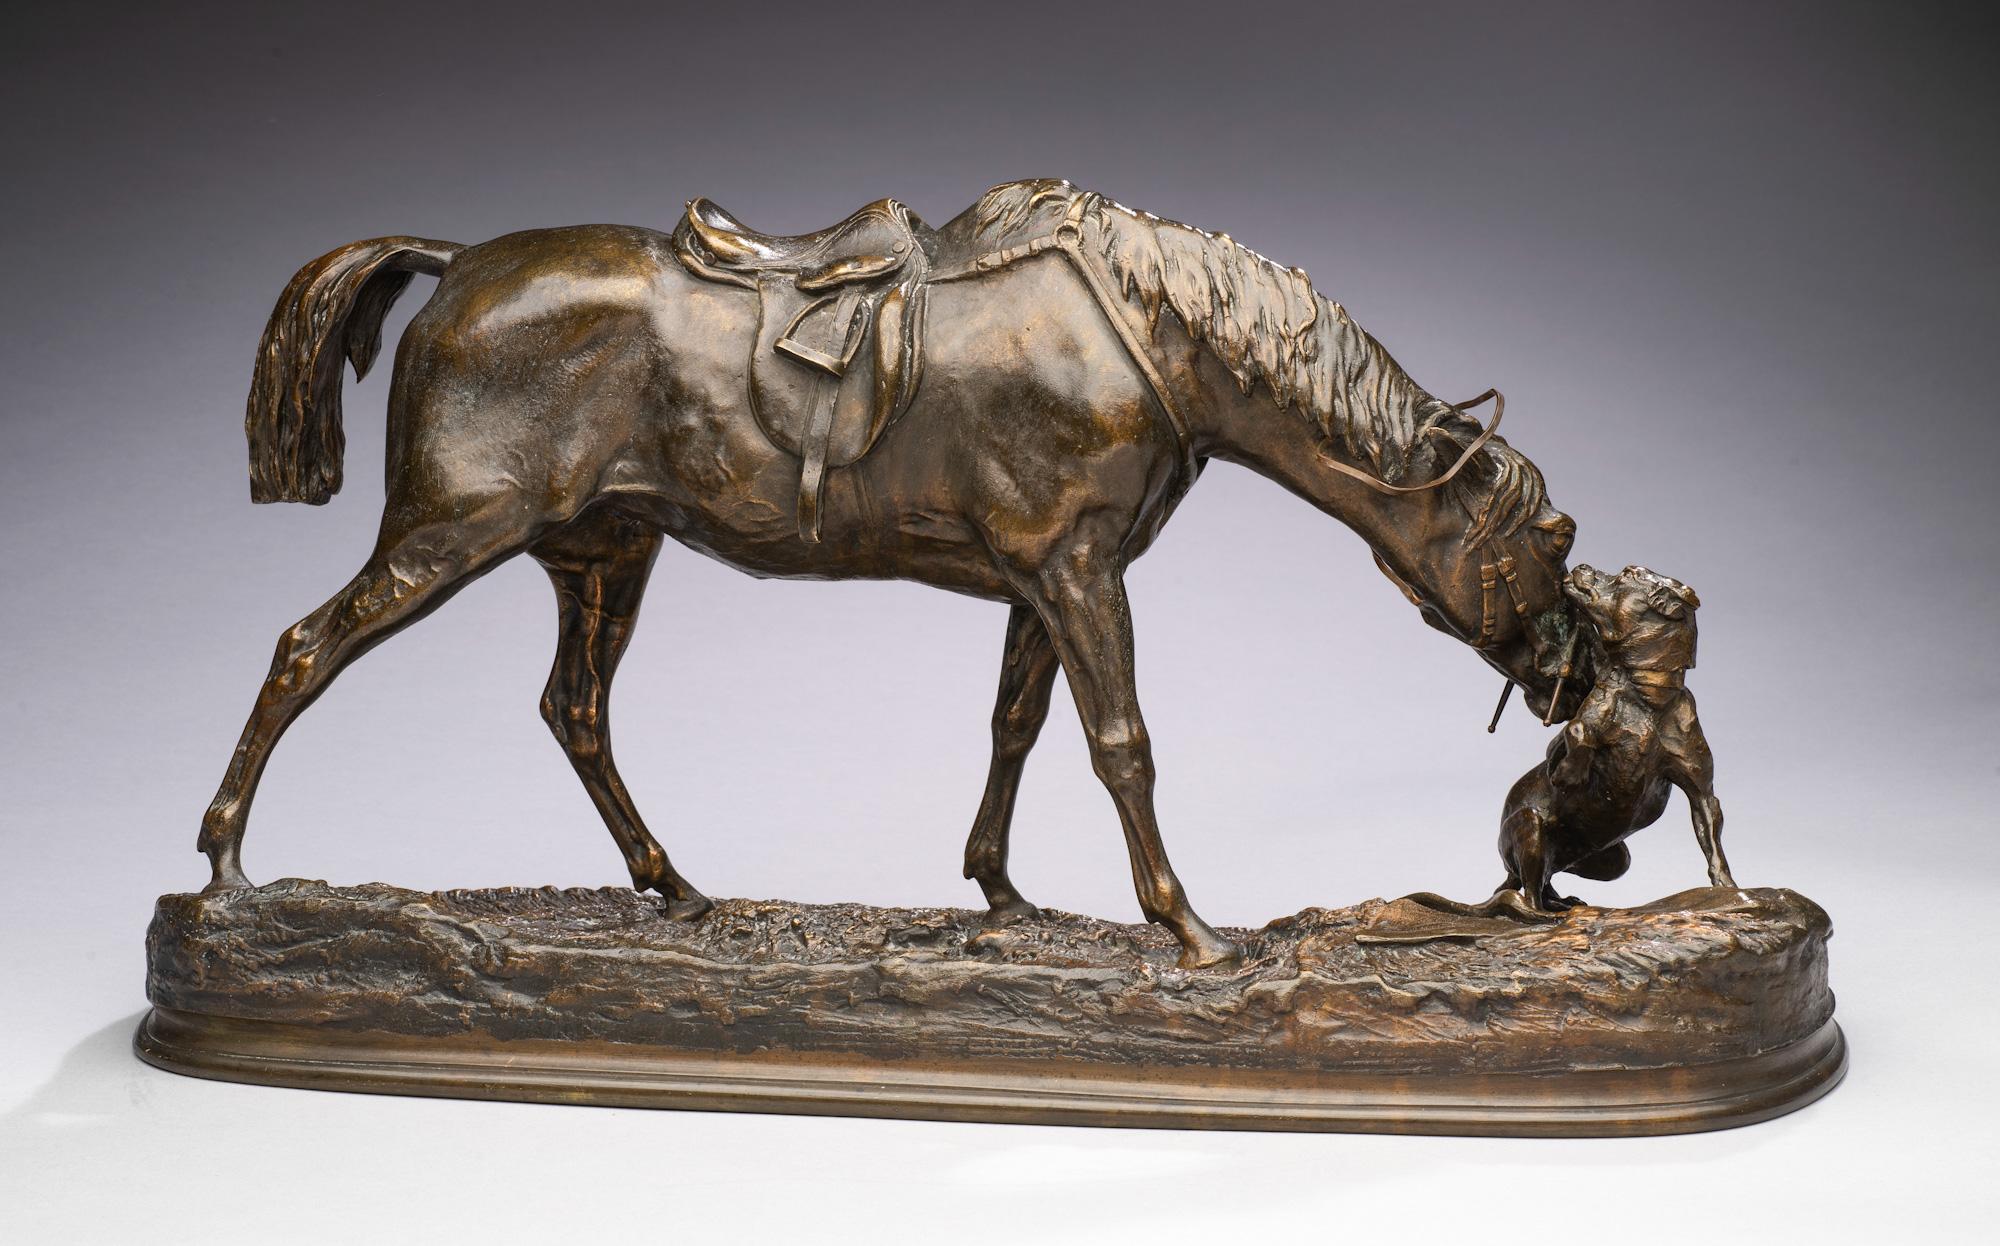 Antique Horse Bronze: Mare in the Stable Playing with a Dog (Good Companions) 
Jument à l'écurie jouant avec un chien
Pierre-Jules Mene (French, 1810-1879)
Bronze
19 x 10 inches

One of Mene's most beloved bronze, well-loved early example with